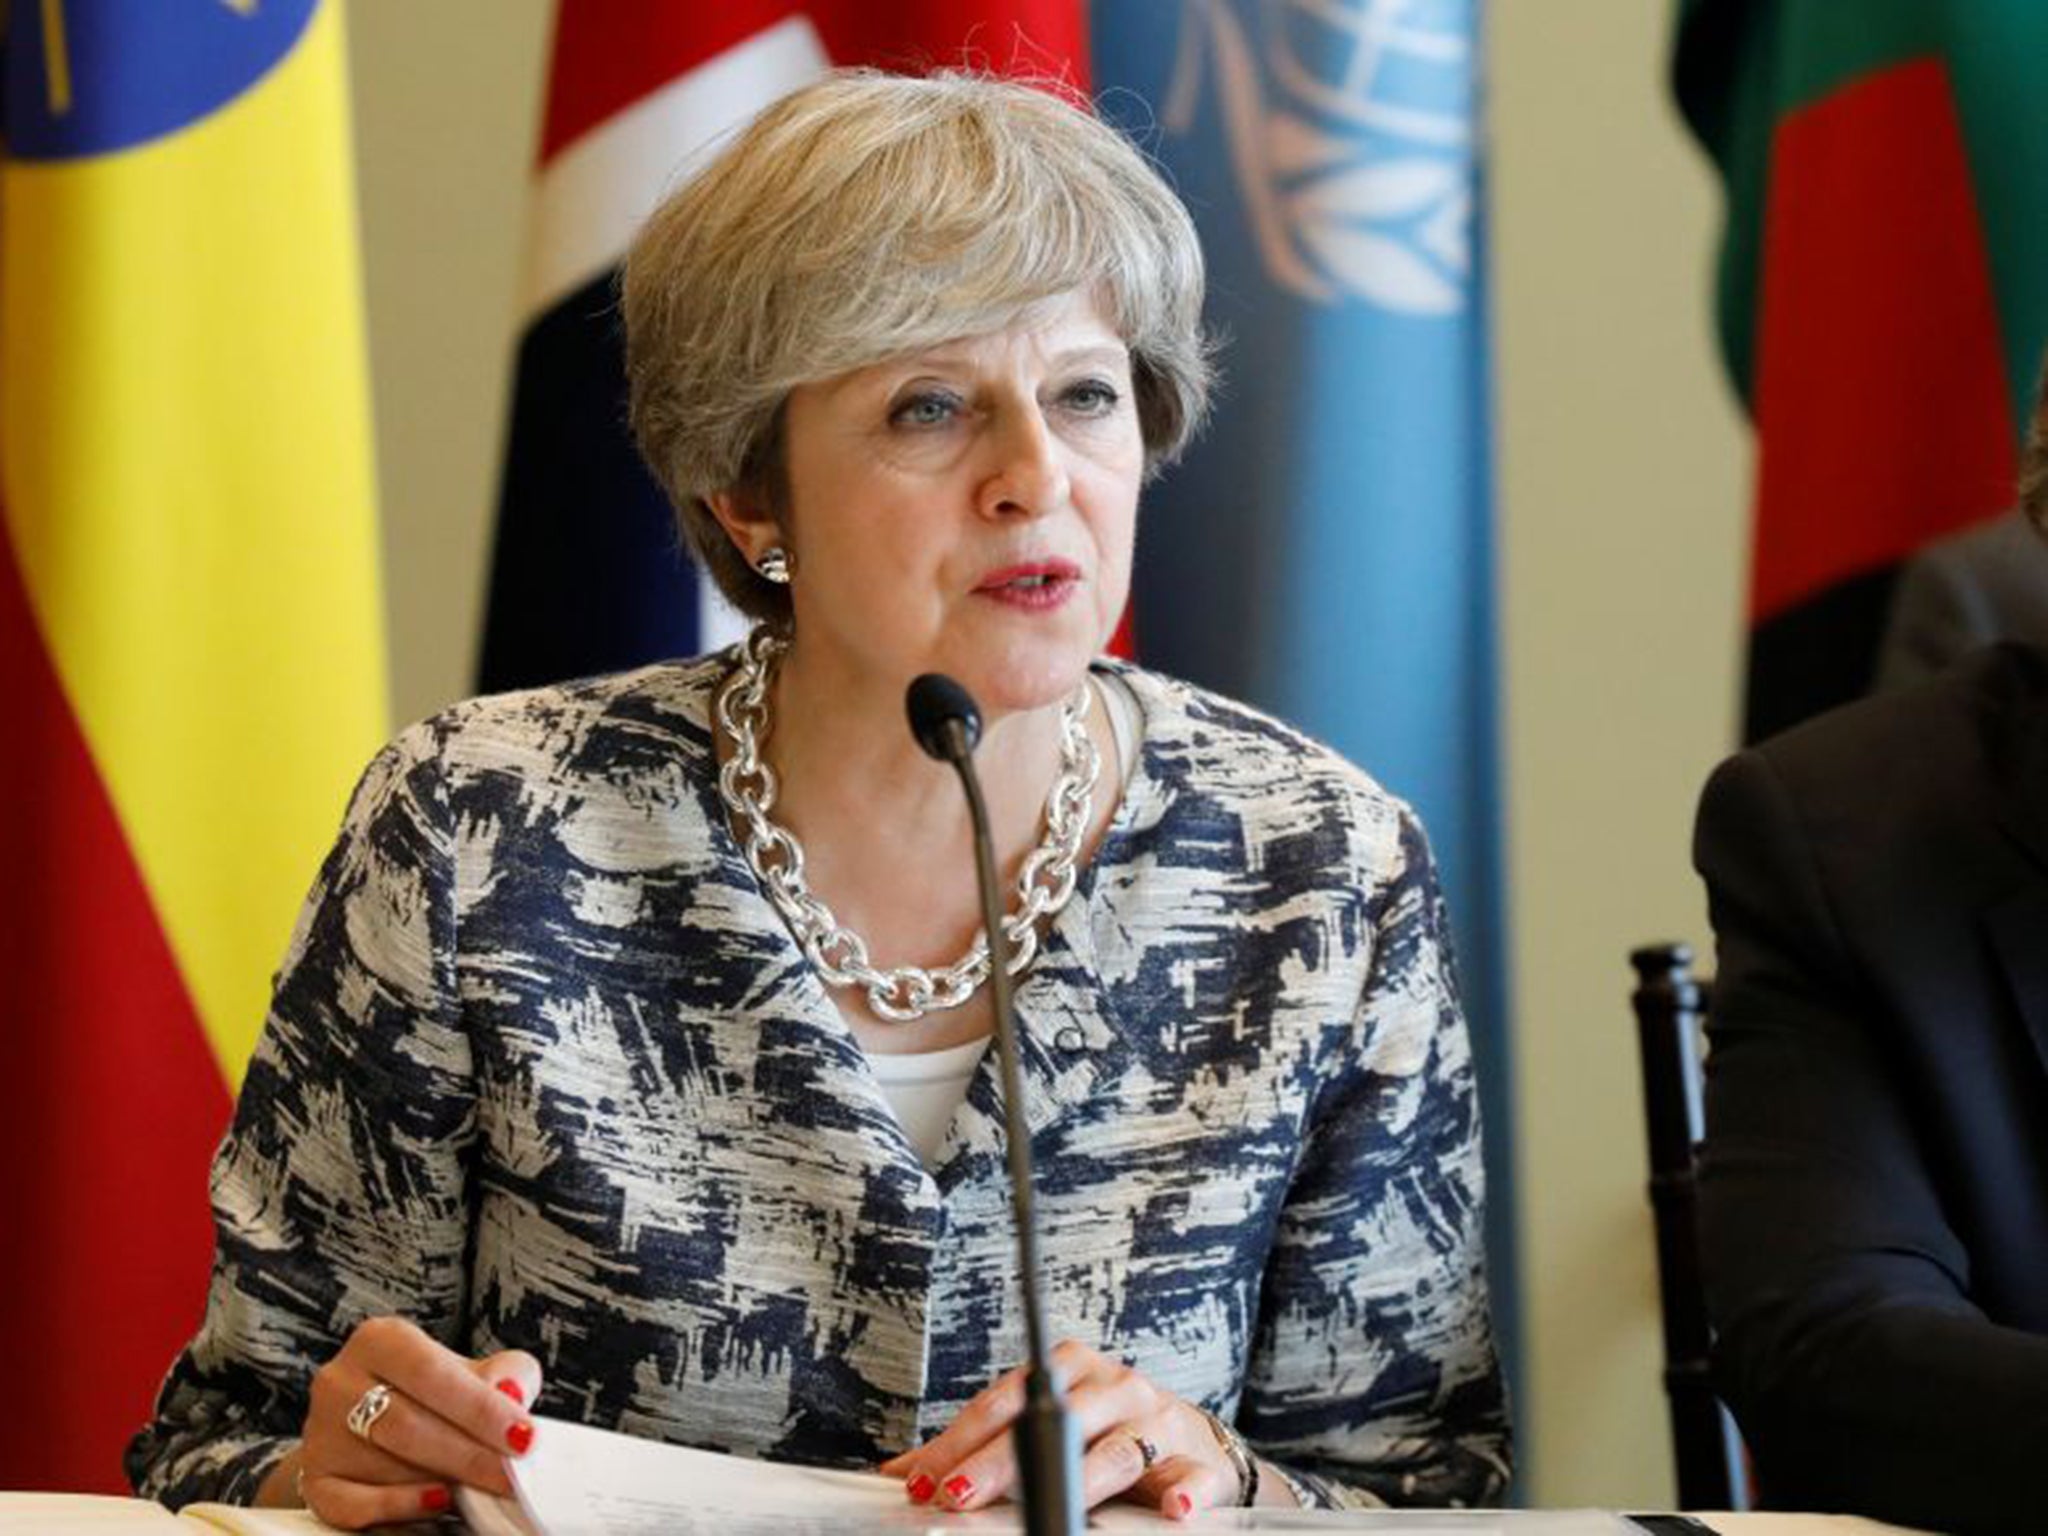 May’s real goal in Florence is to unblock the stalled negotiations with the EU on the UK’s exit terms by talking money